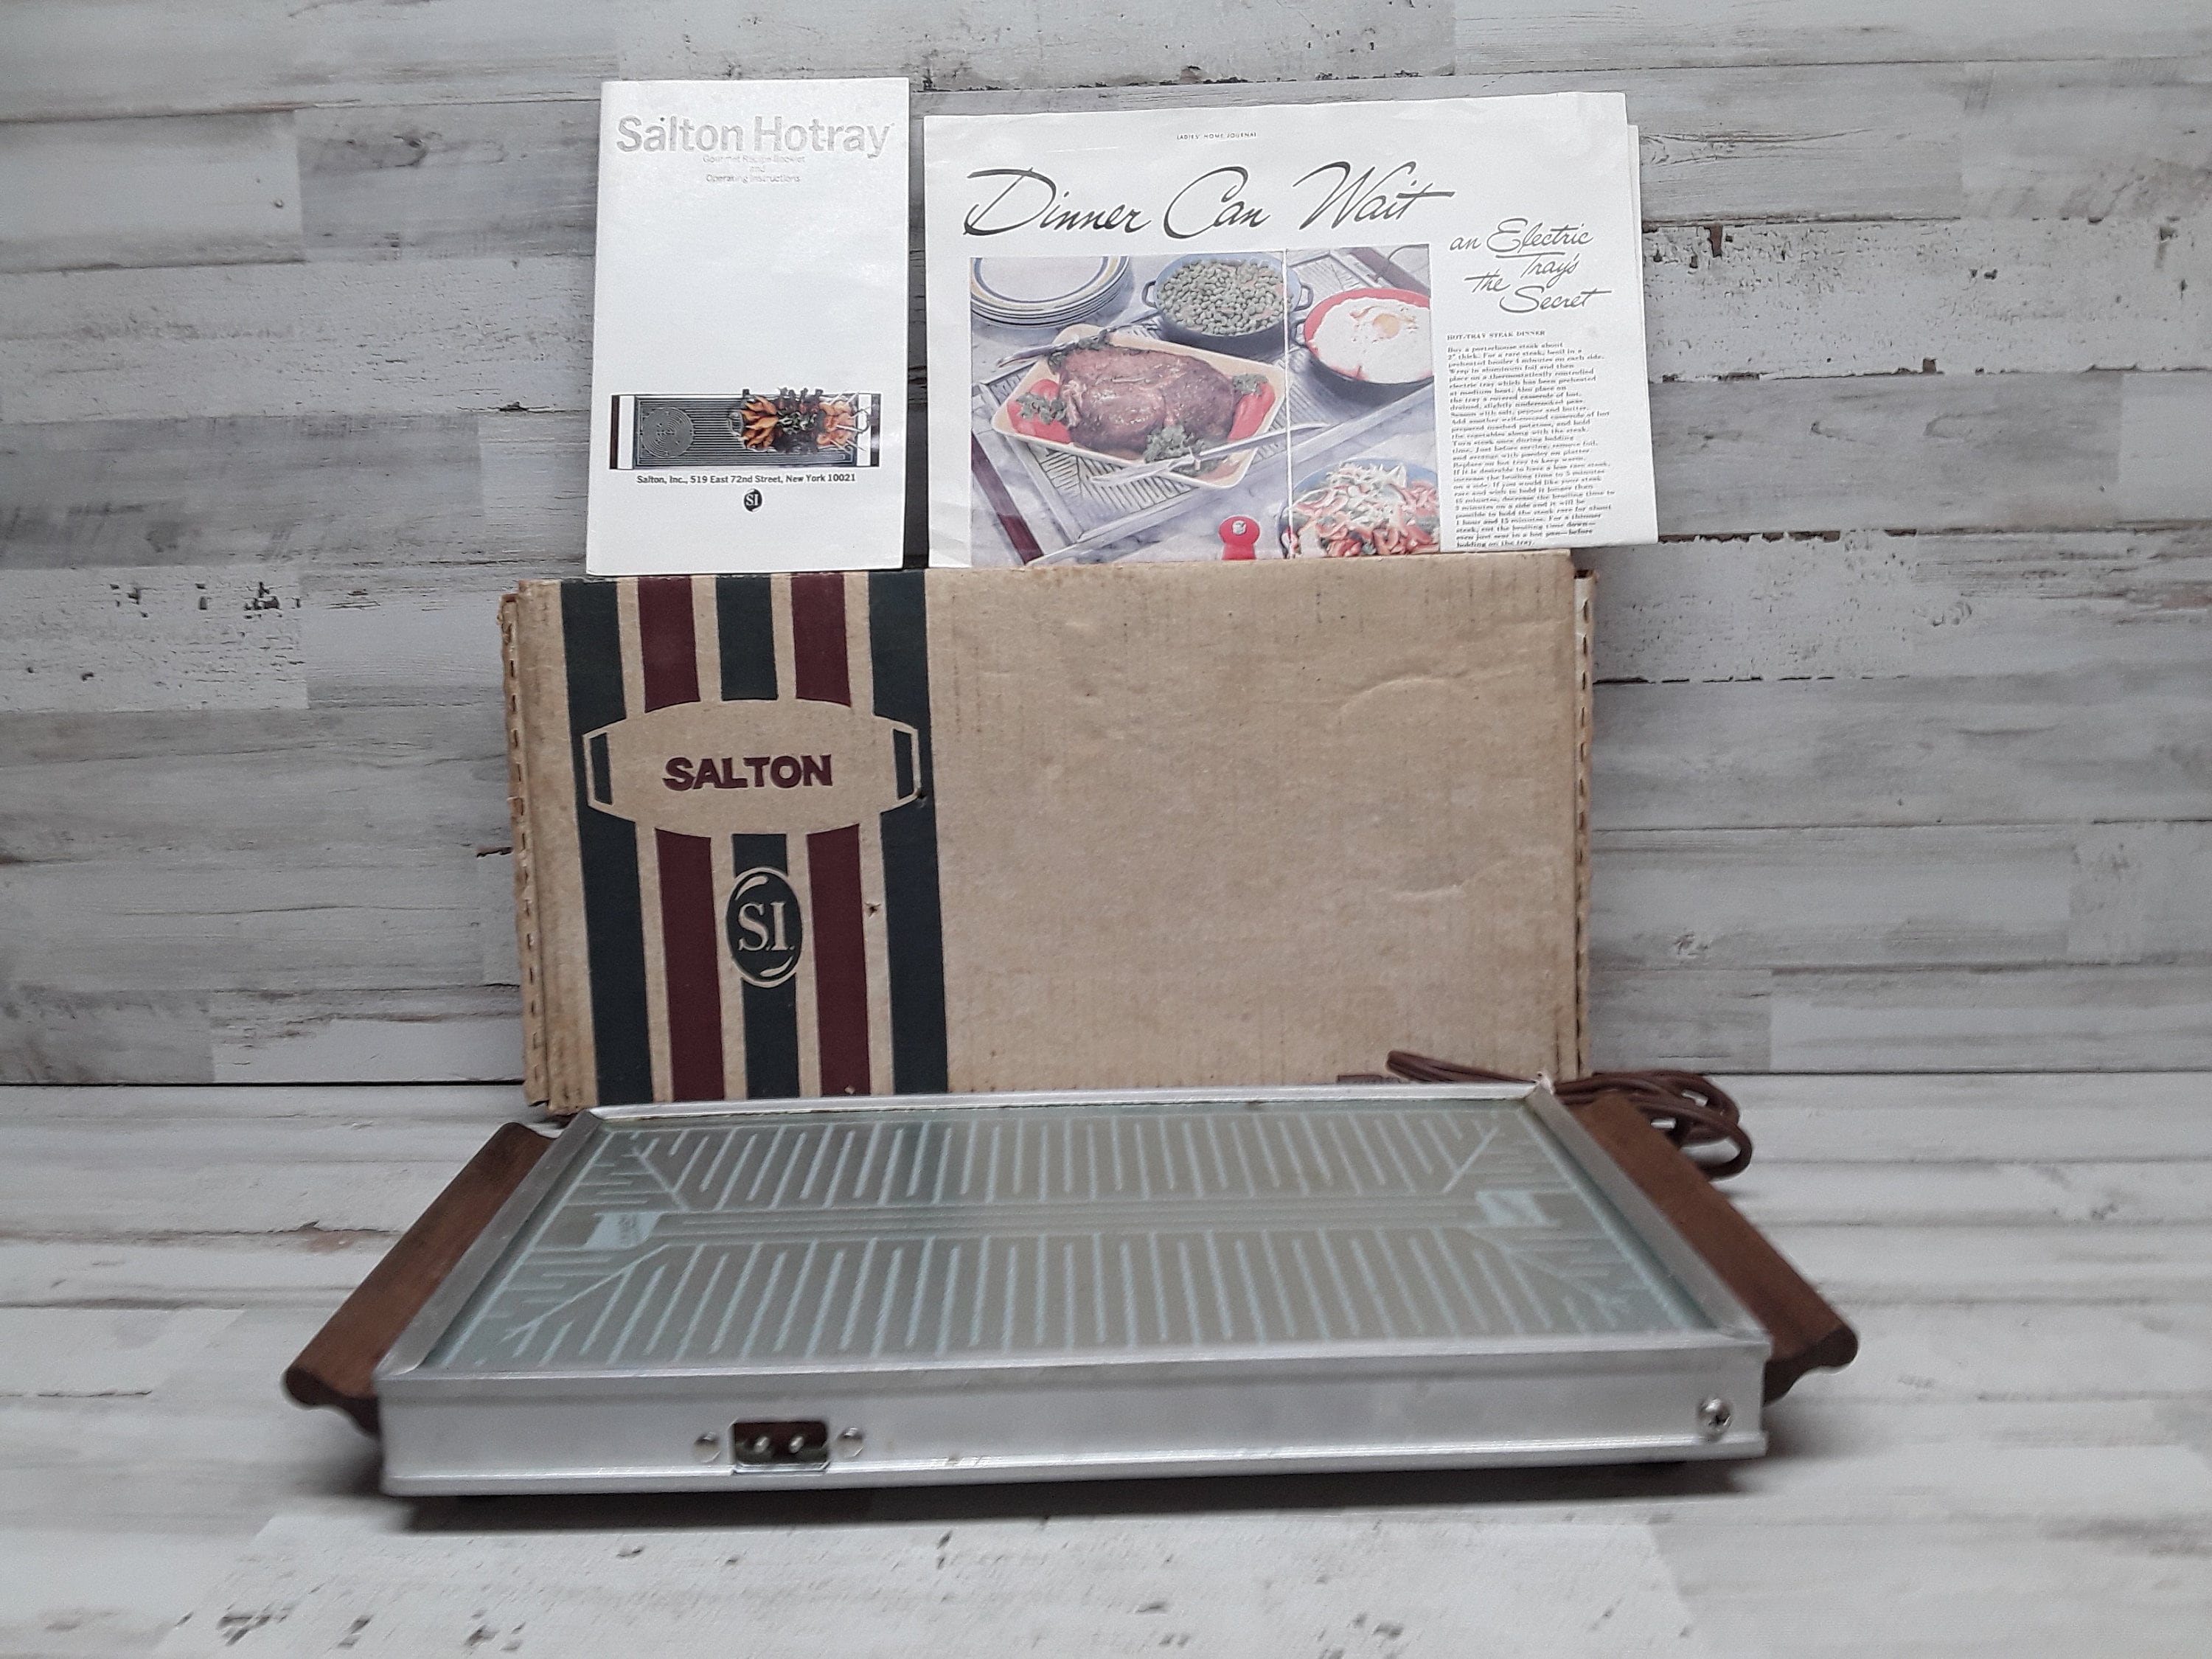 Vintage Salton Hotray Food Warmer Electric Hot Plate Square